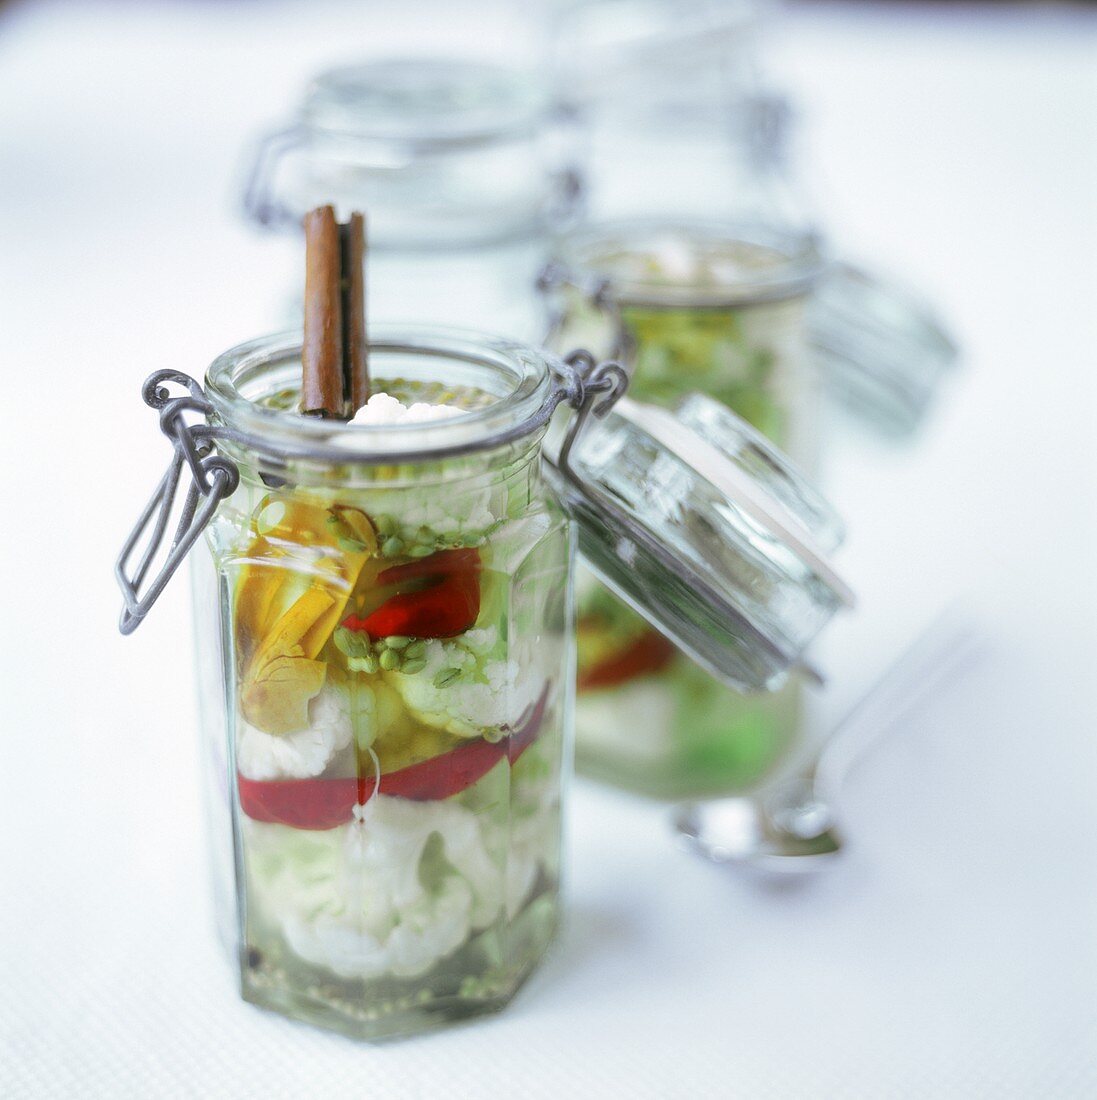 Pickled cauliflower with spices in pickling jar